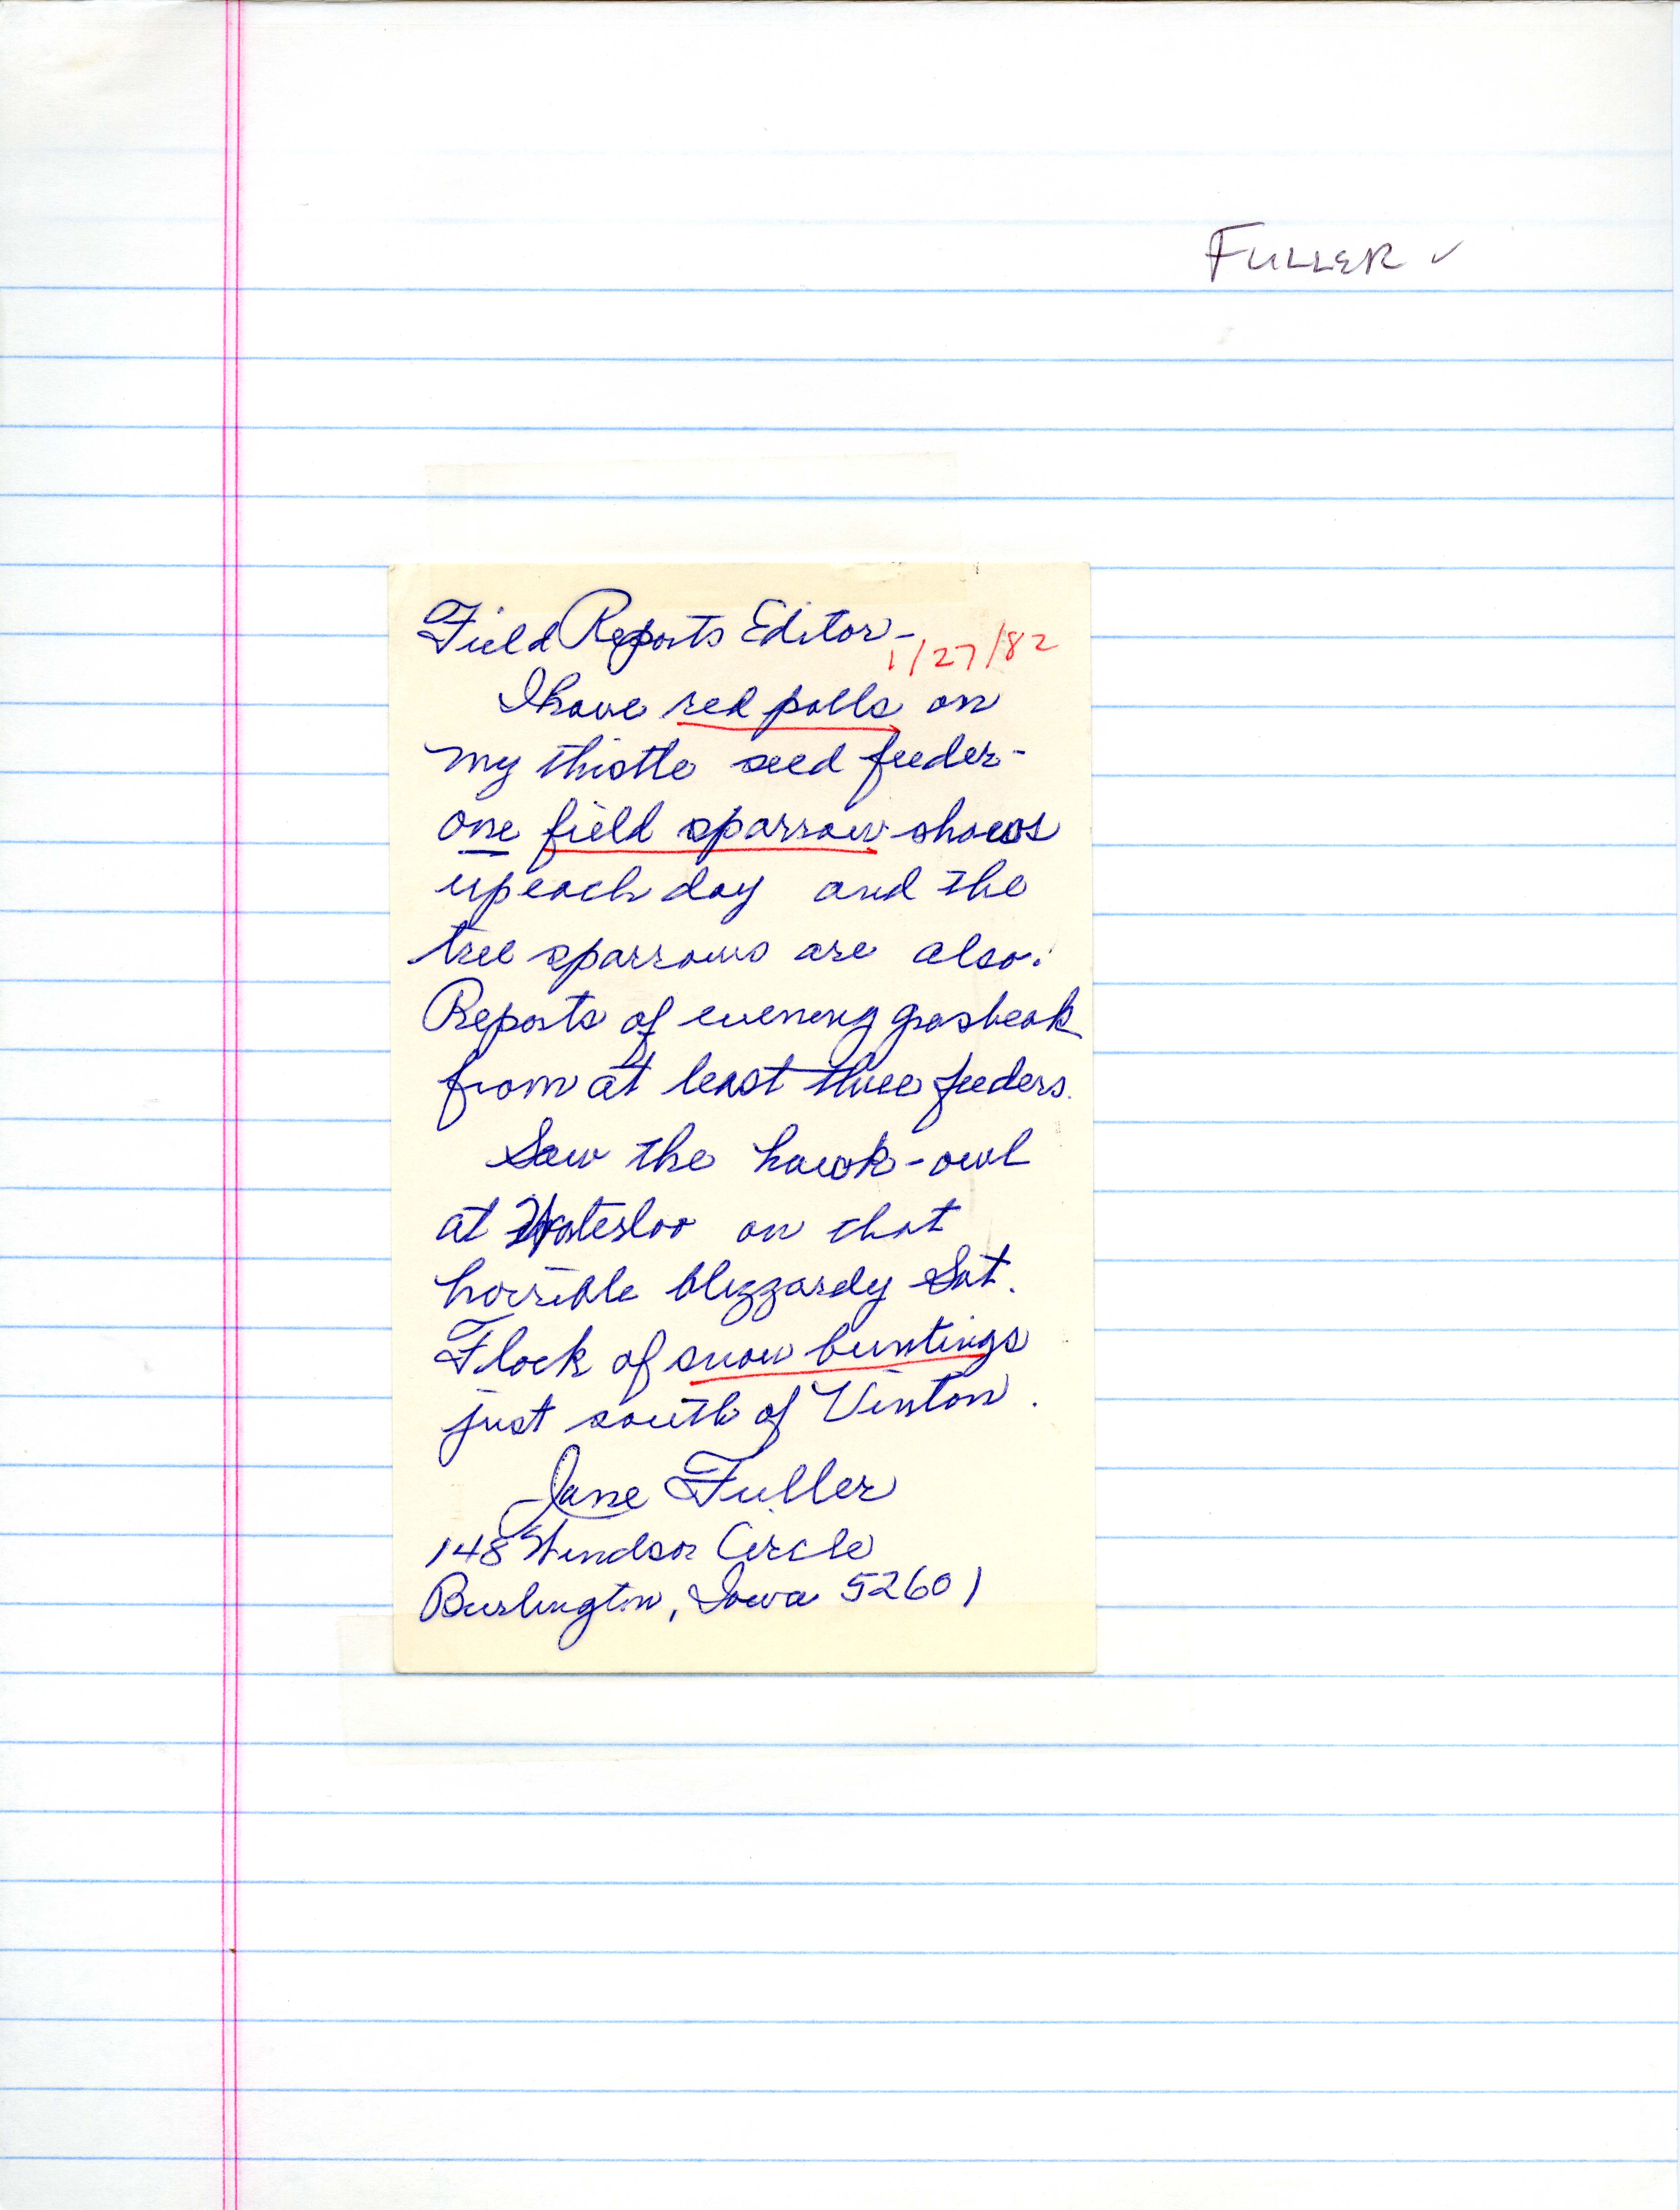 Jane Fuller letter to the Field Reports editor regarding field notes, January 27, 1982